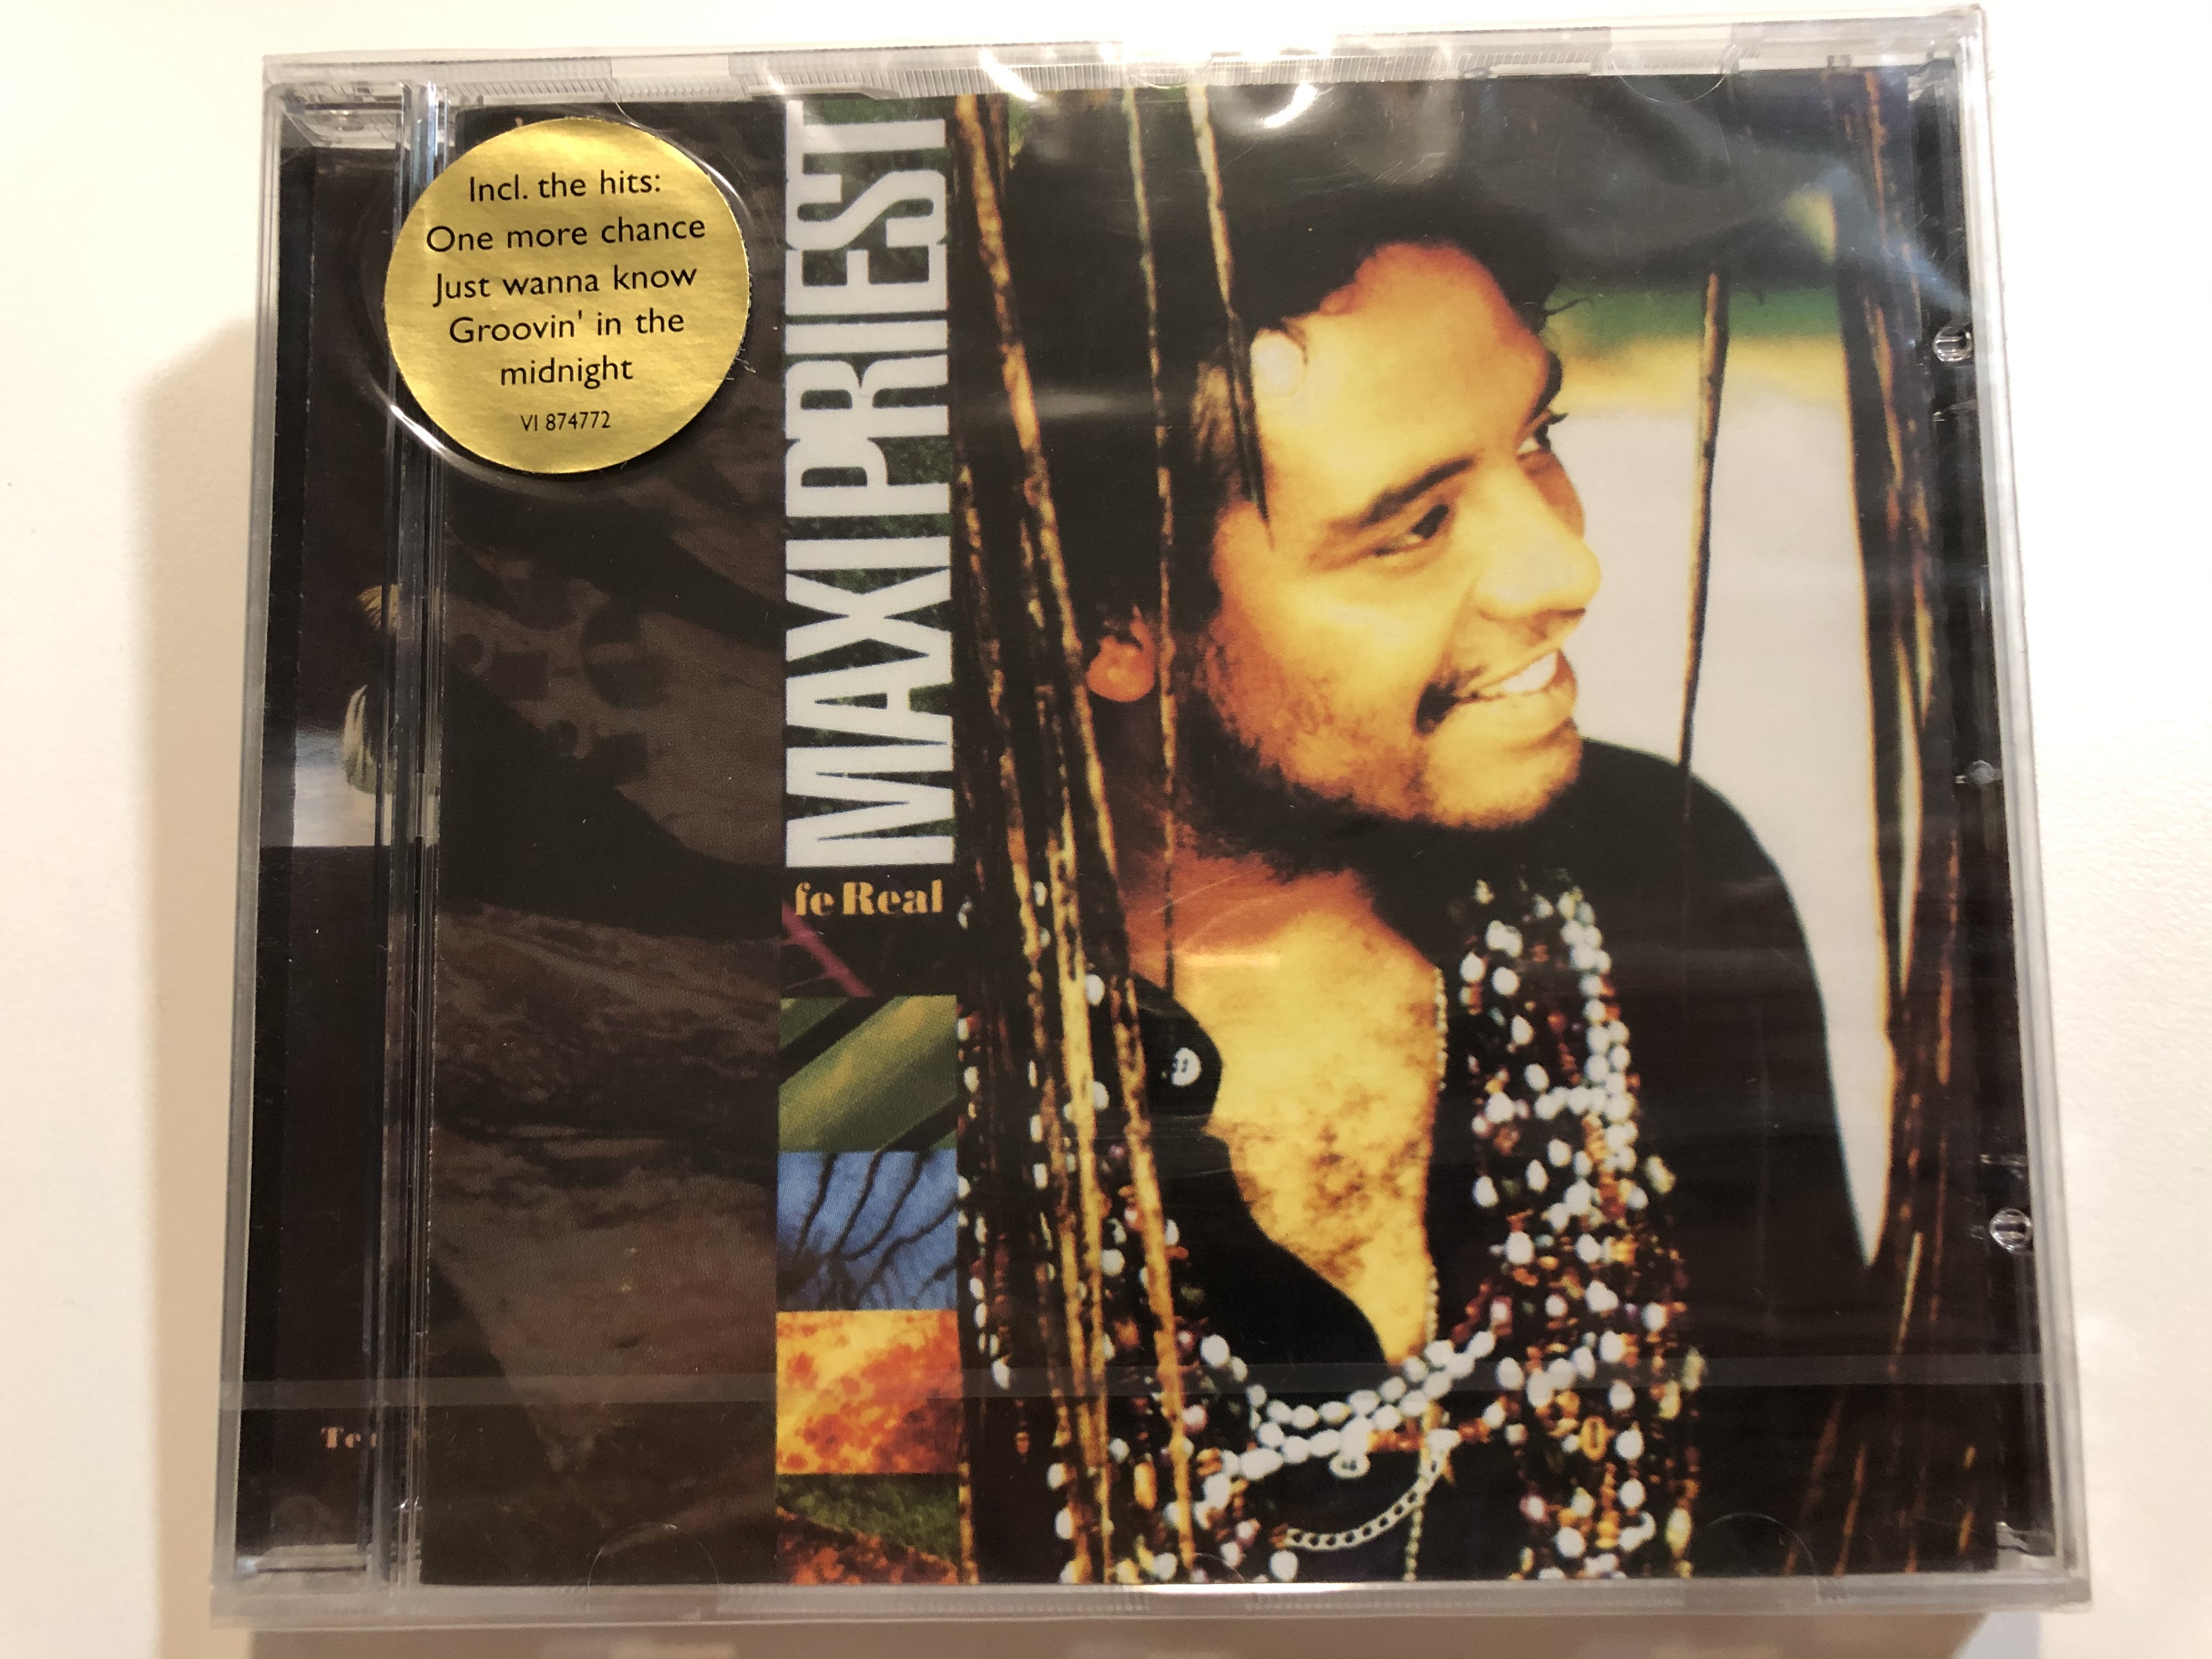 maxi-priest-fe-real-incl.-the-hits-one-more-chance-just-wanna-know-groovin-in-the-midnight-disky-audio-cd-1996-vi-874772-1-.jpg